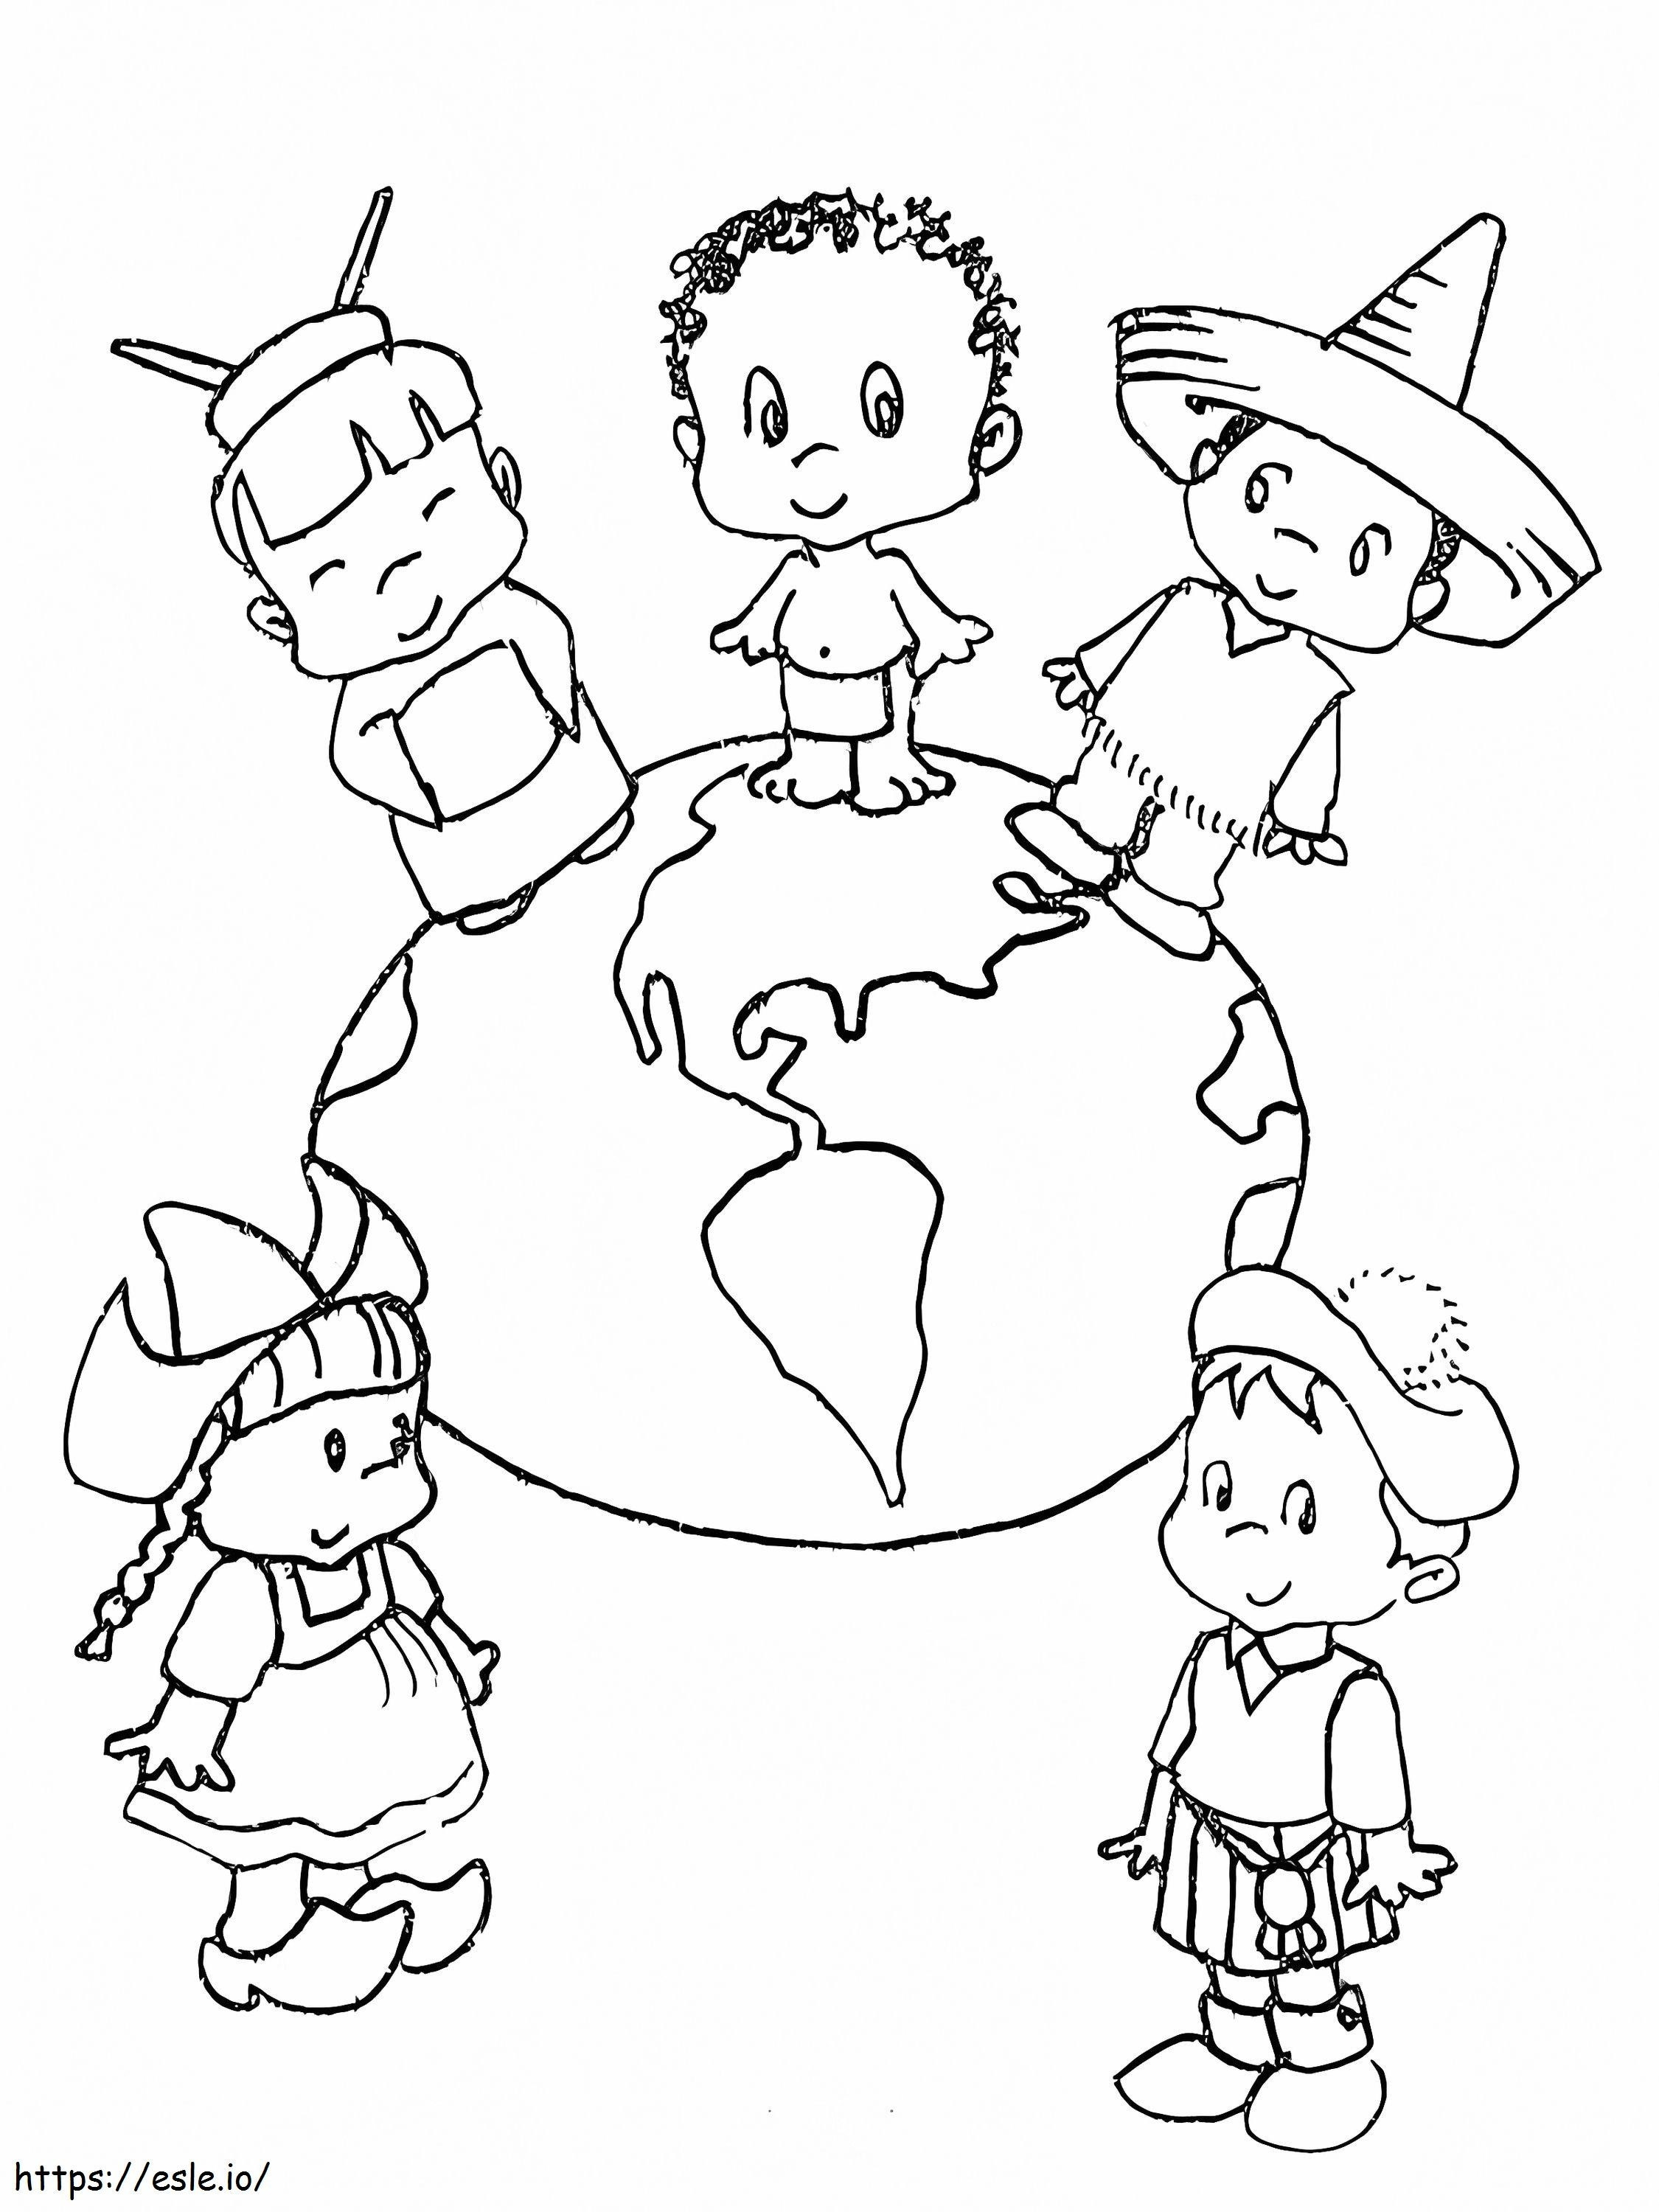 Happy Children'S Day coloring page